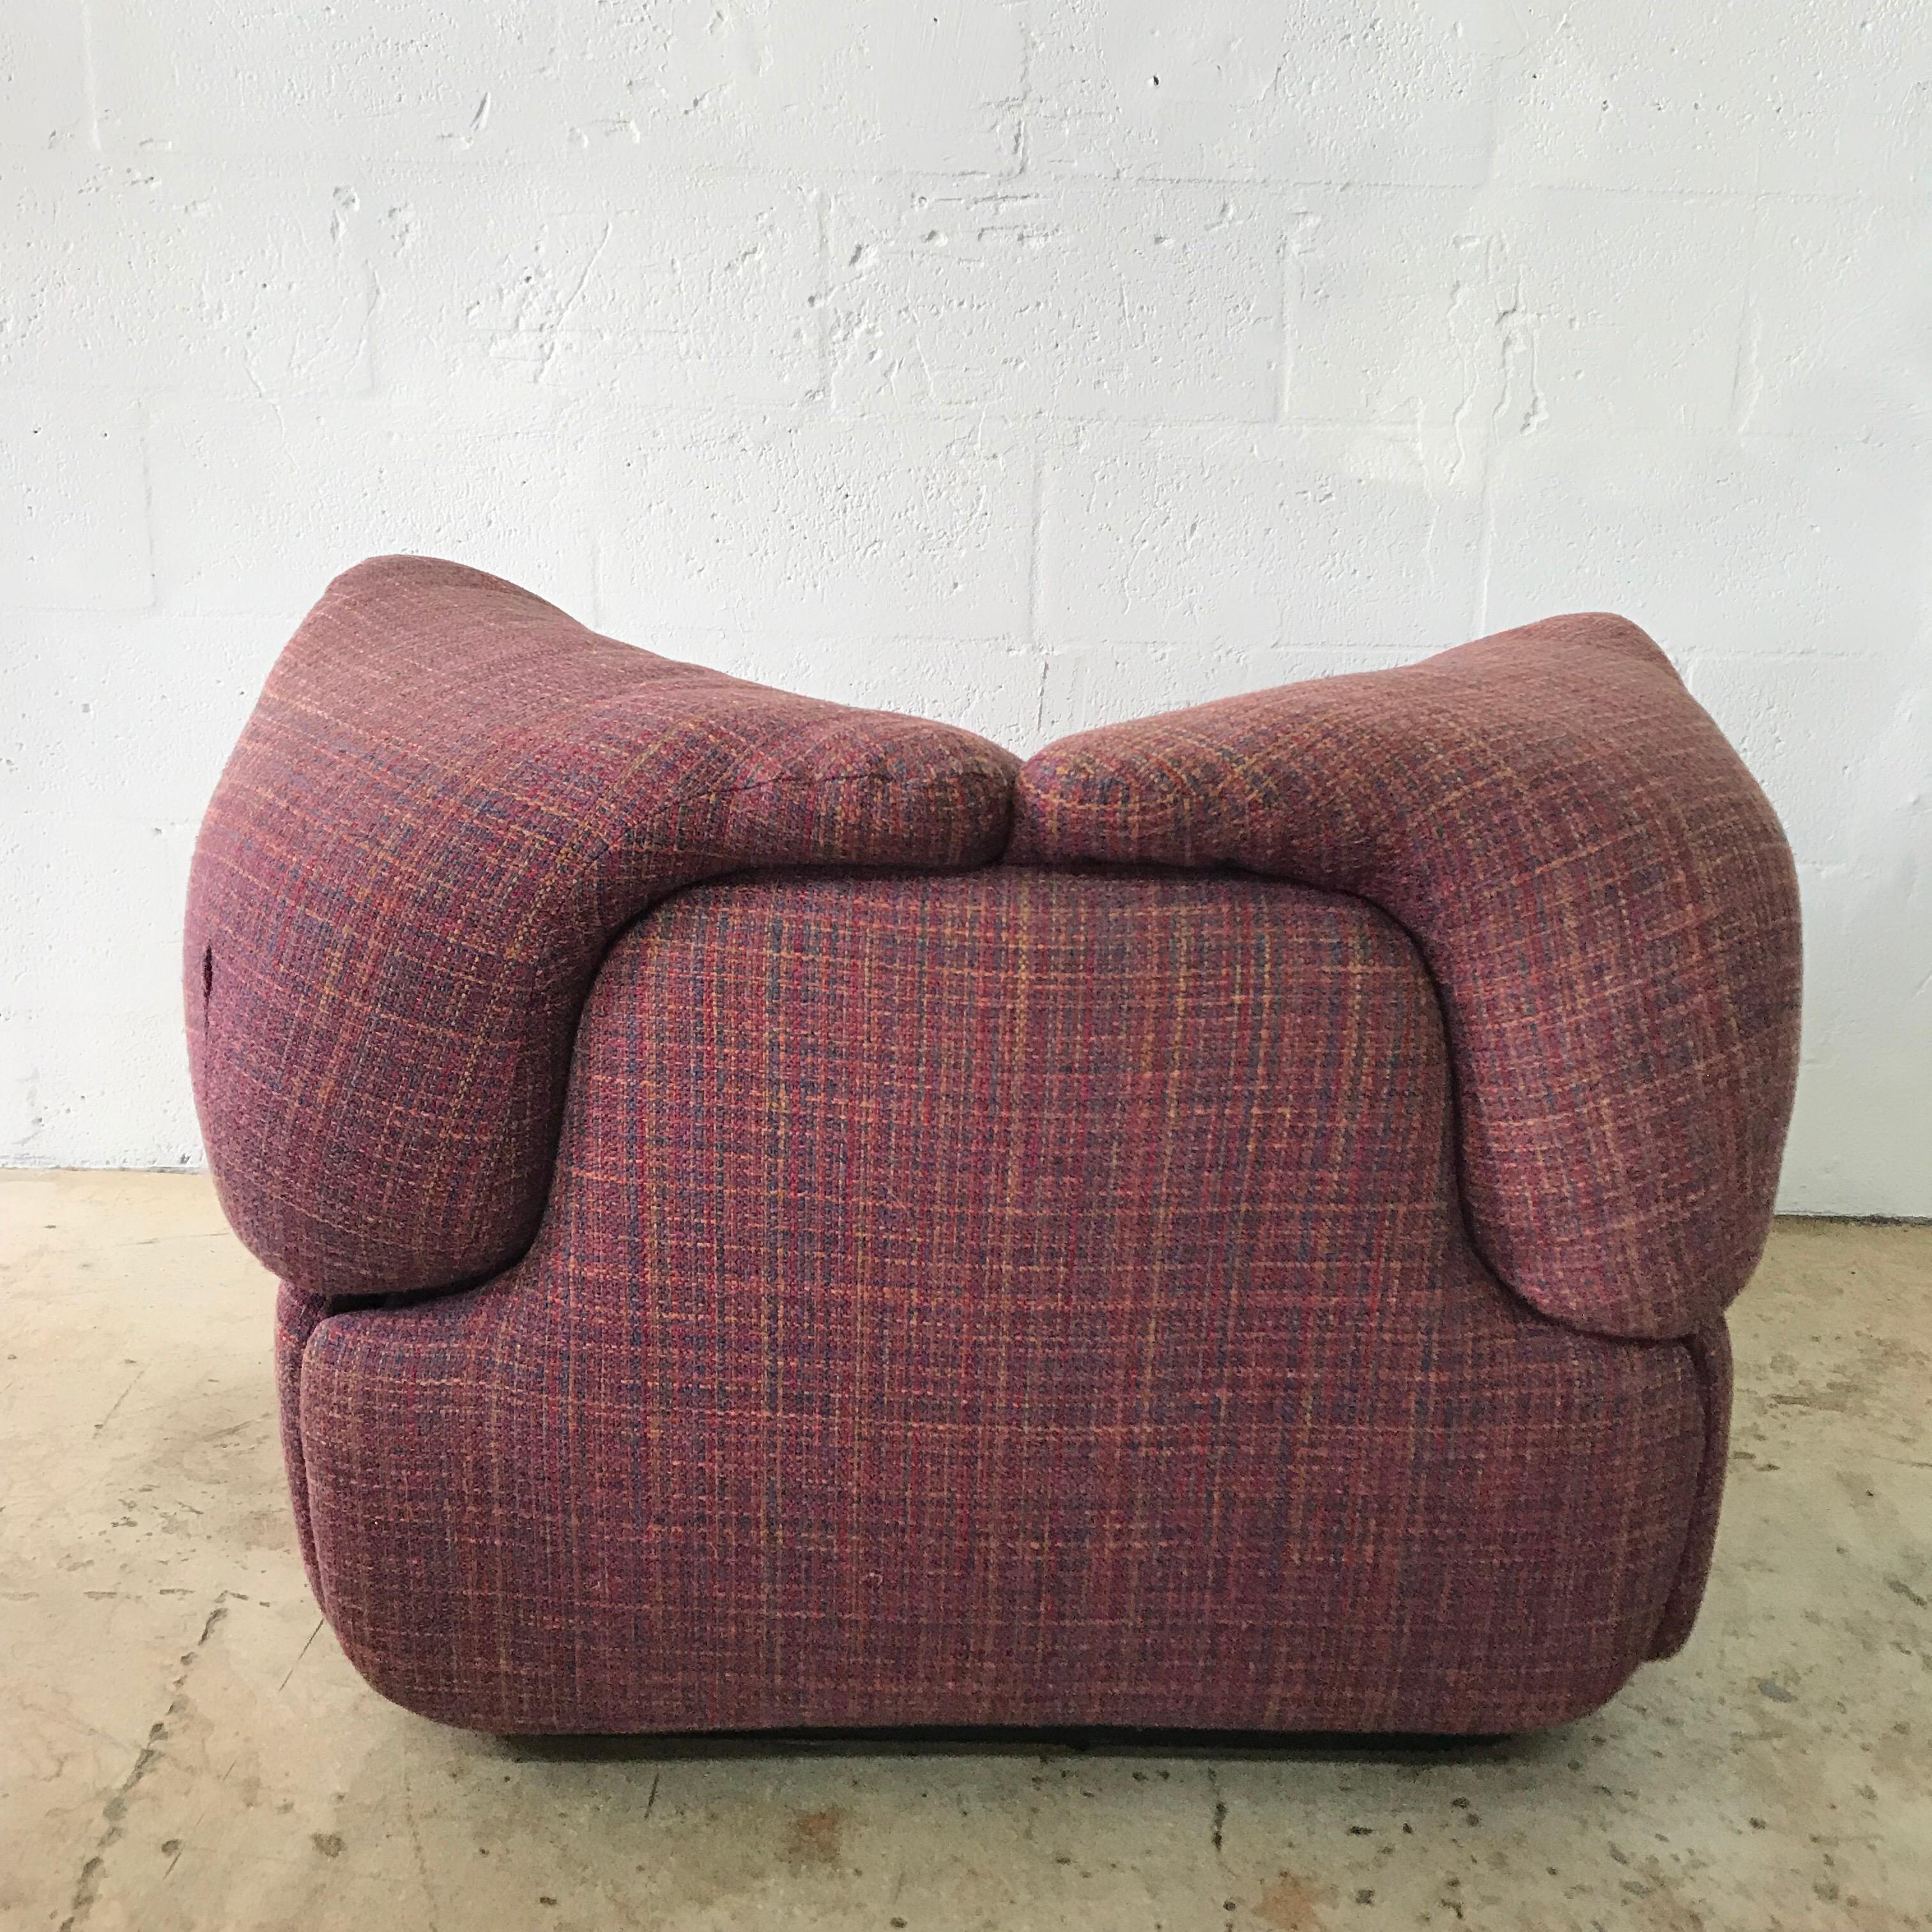 Italian Pair of Pink Tweed “Confidential” Chairs by Alberto Rosselli for Saporiti Italia